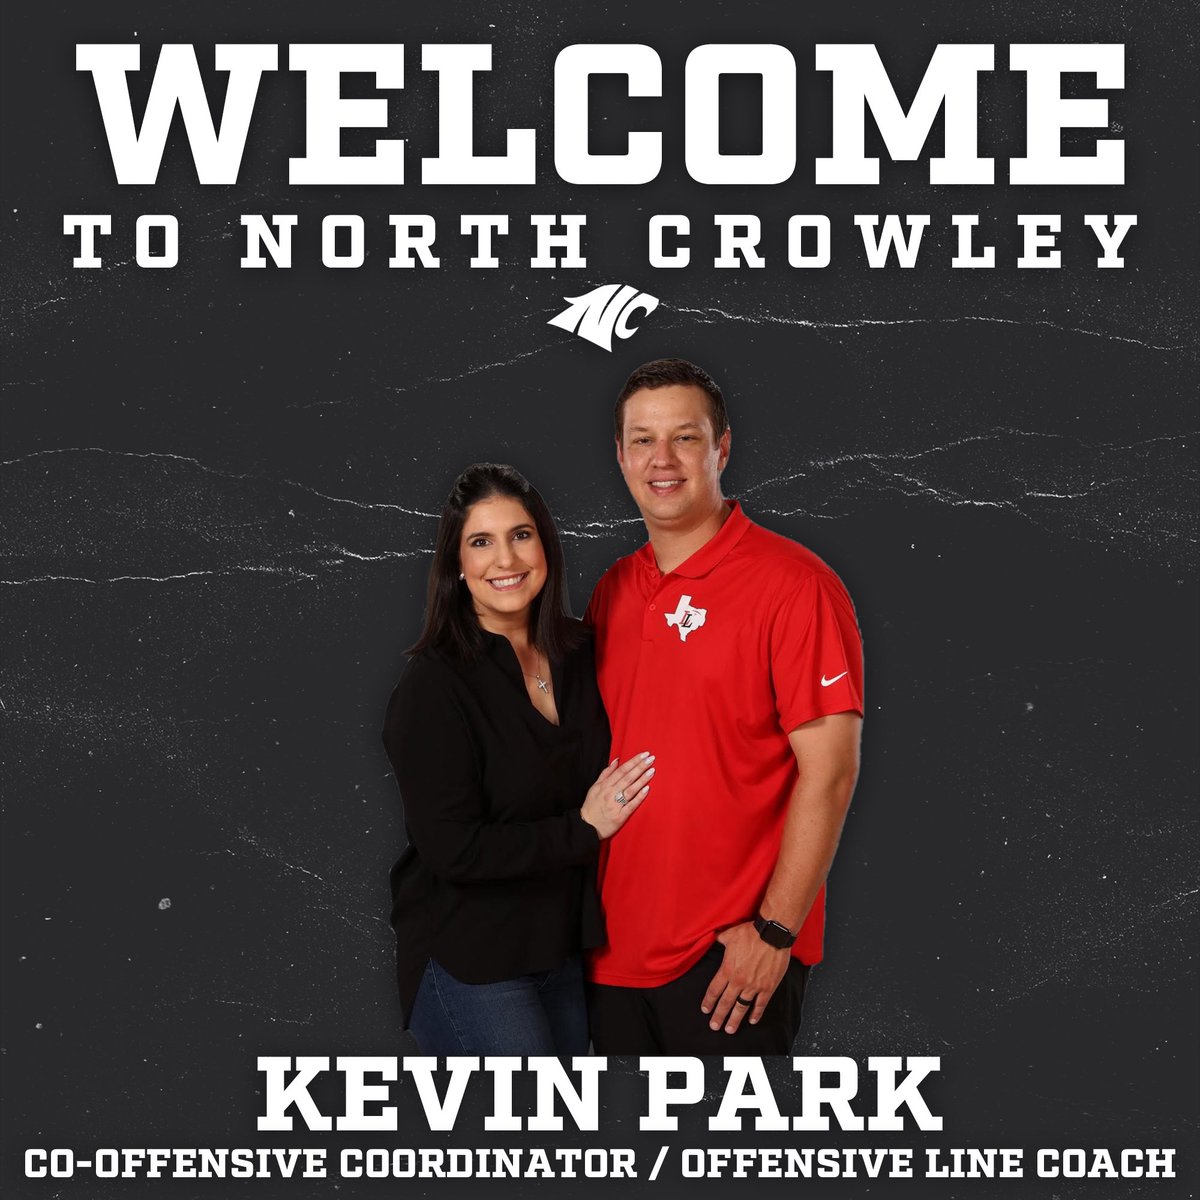 Panther Nation! Please welcome our new Co-Offensive Coordinator and Offensive Line Coach Kevin Park! (@CoachKPark) Big time addition to our staff and one of the best offensive minds in the state!